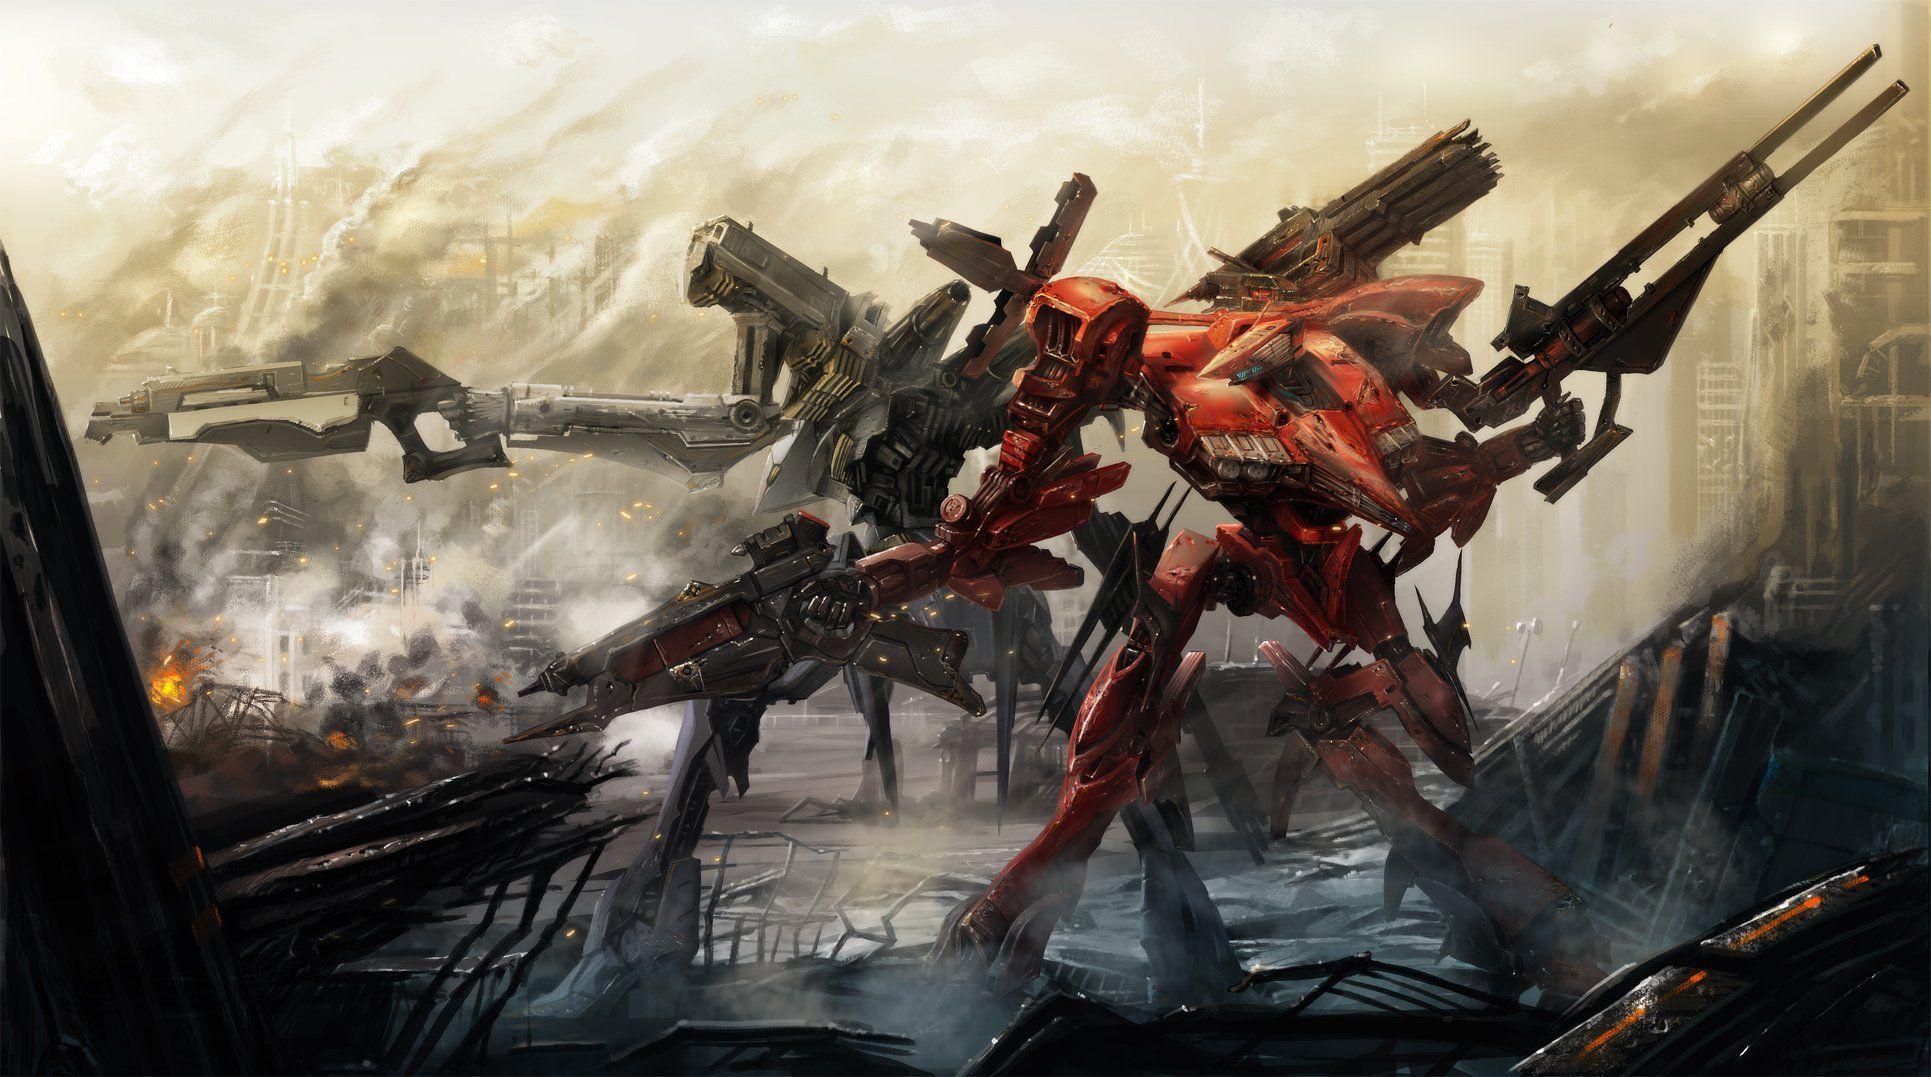 Armored Core Wallpapers Top Free Armored Core Backgrounds Wallpaperaccess